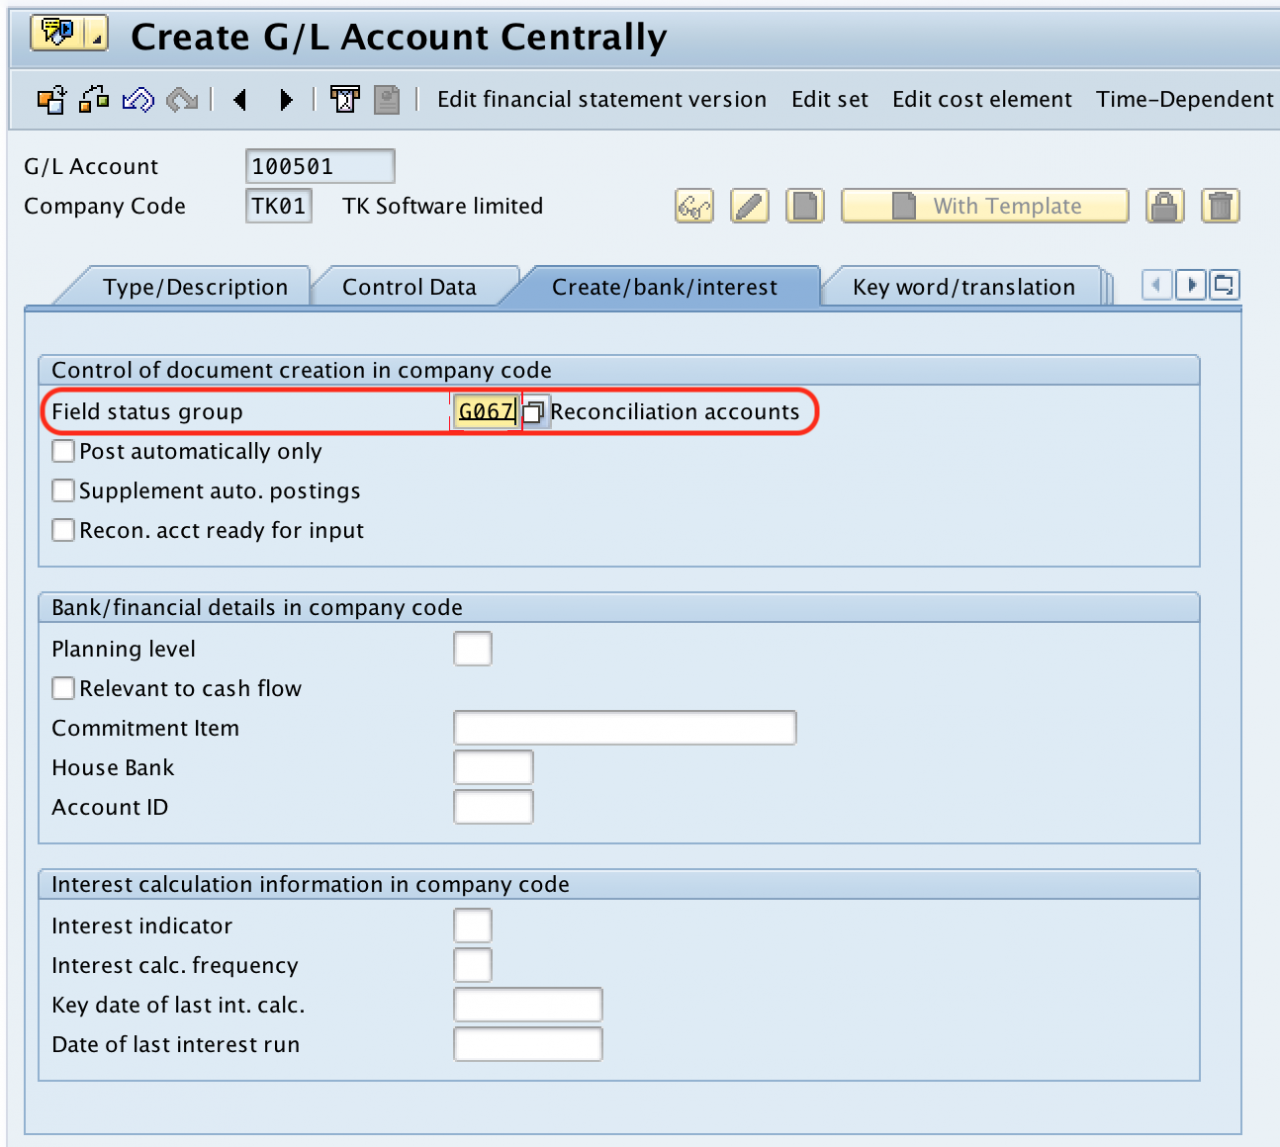 Account is an invalid reconciliation account in company code